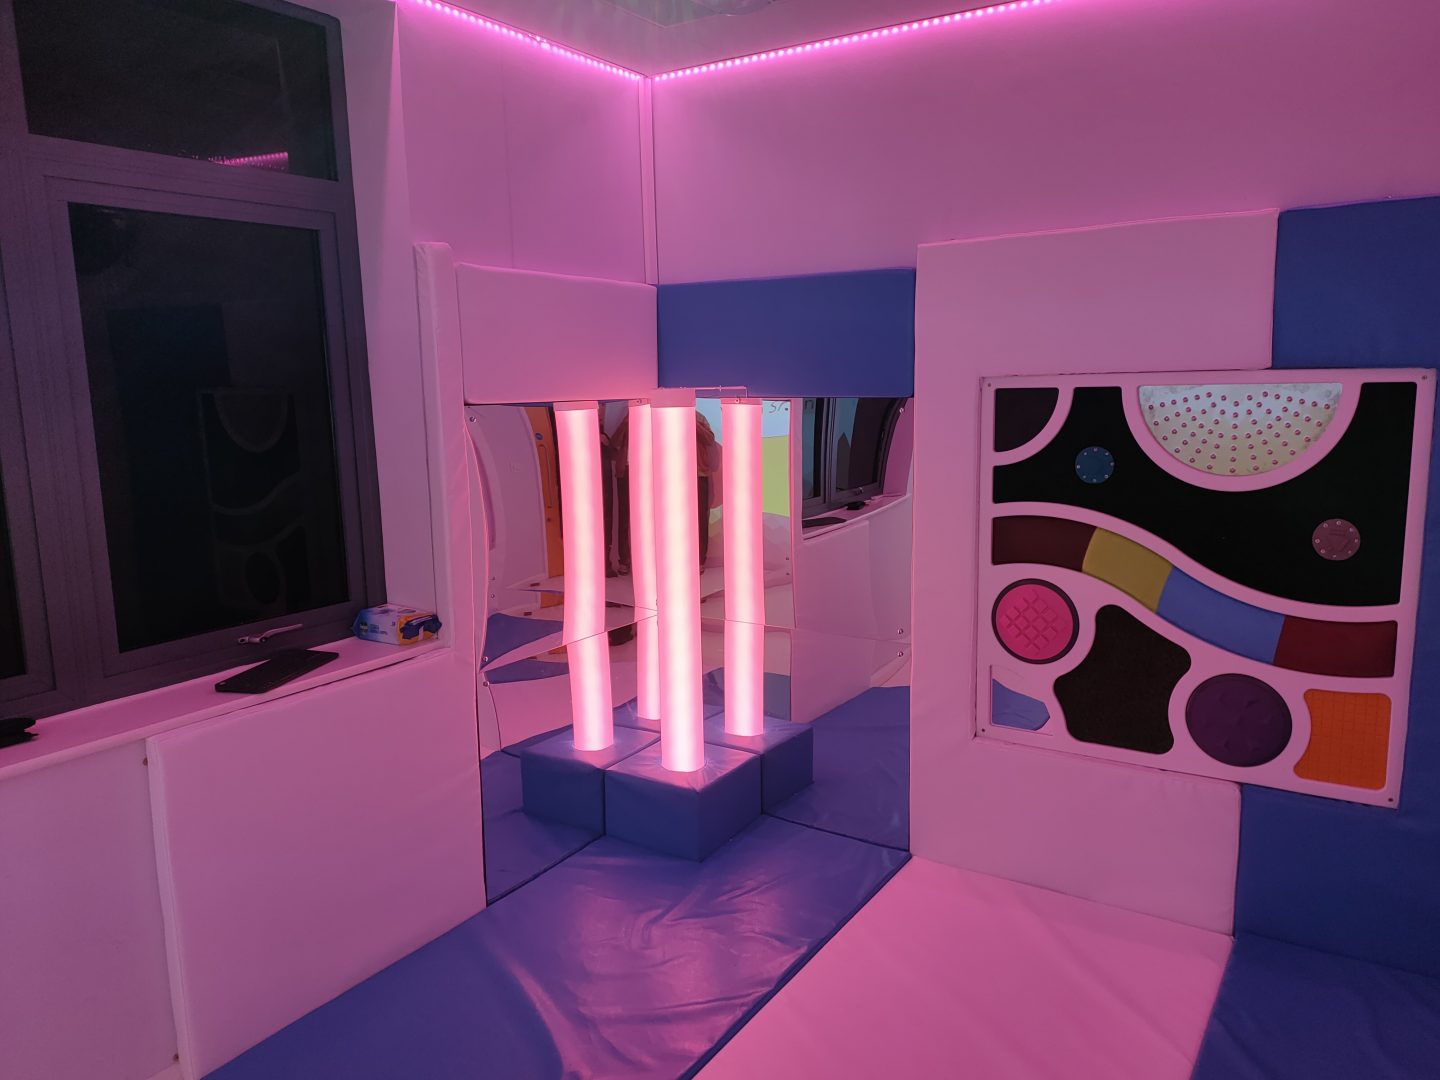 Well presented sensory corner, the walls and floor are soft padded in alternate blue and white with a soft padded plinth housing the calming waterless tube. There is also a tactile panel housed within the soft padding for the users of the sensory room to engage with.